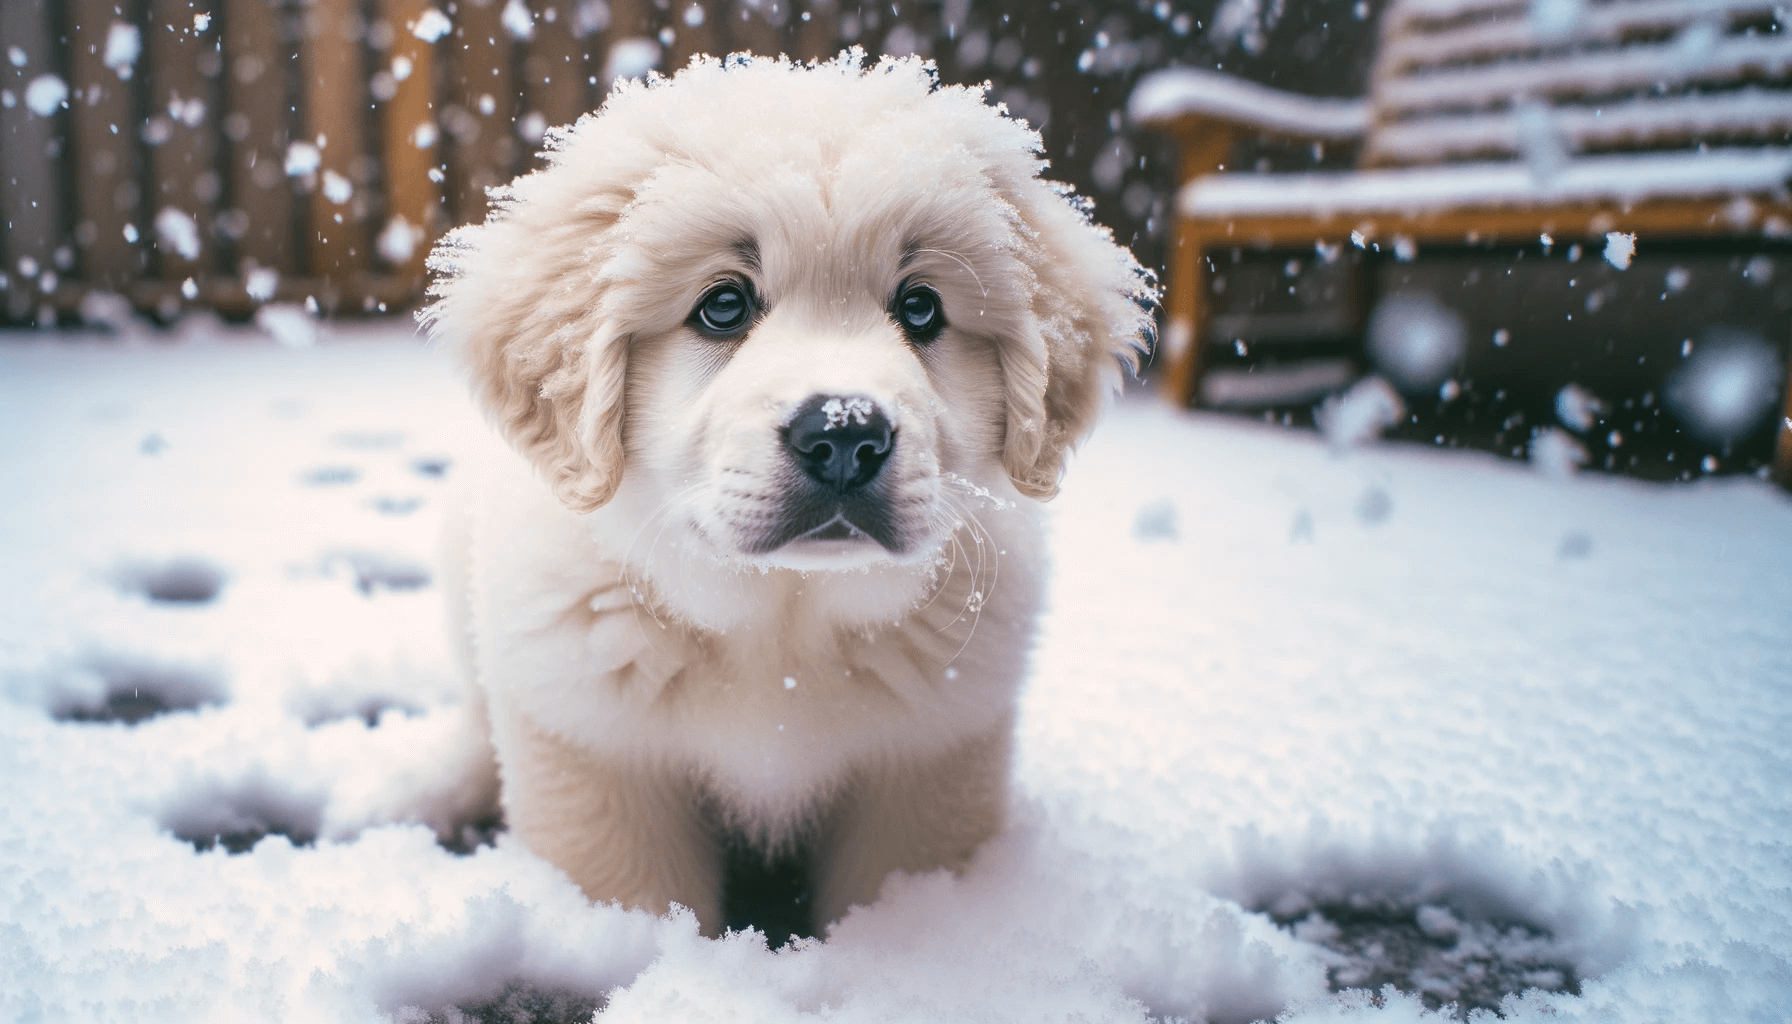 Pyrador puppy experiencing snow for the first time, pure joy on its face